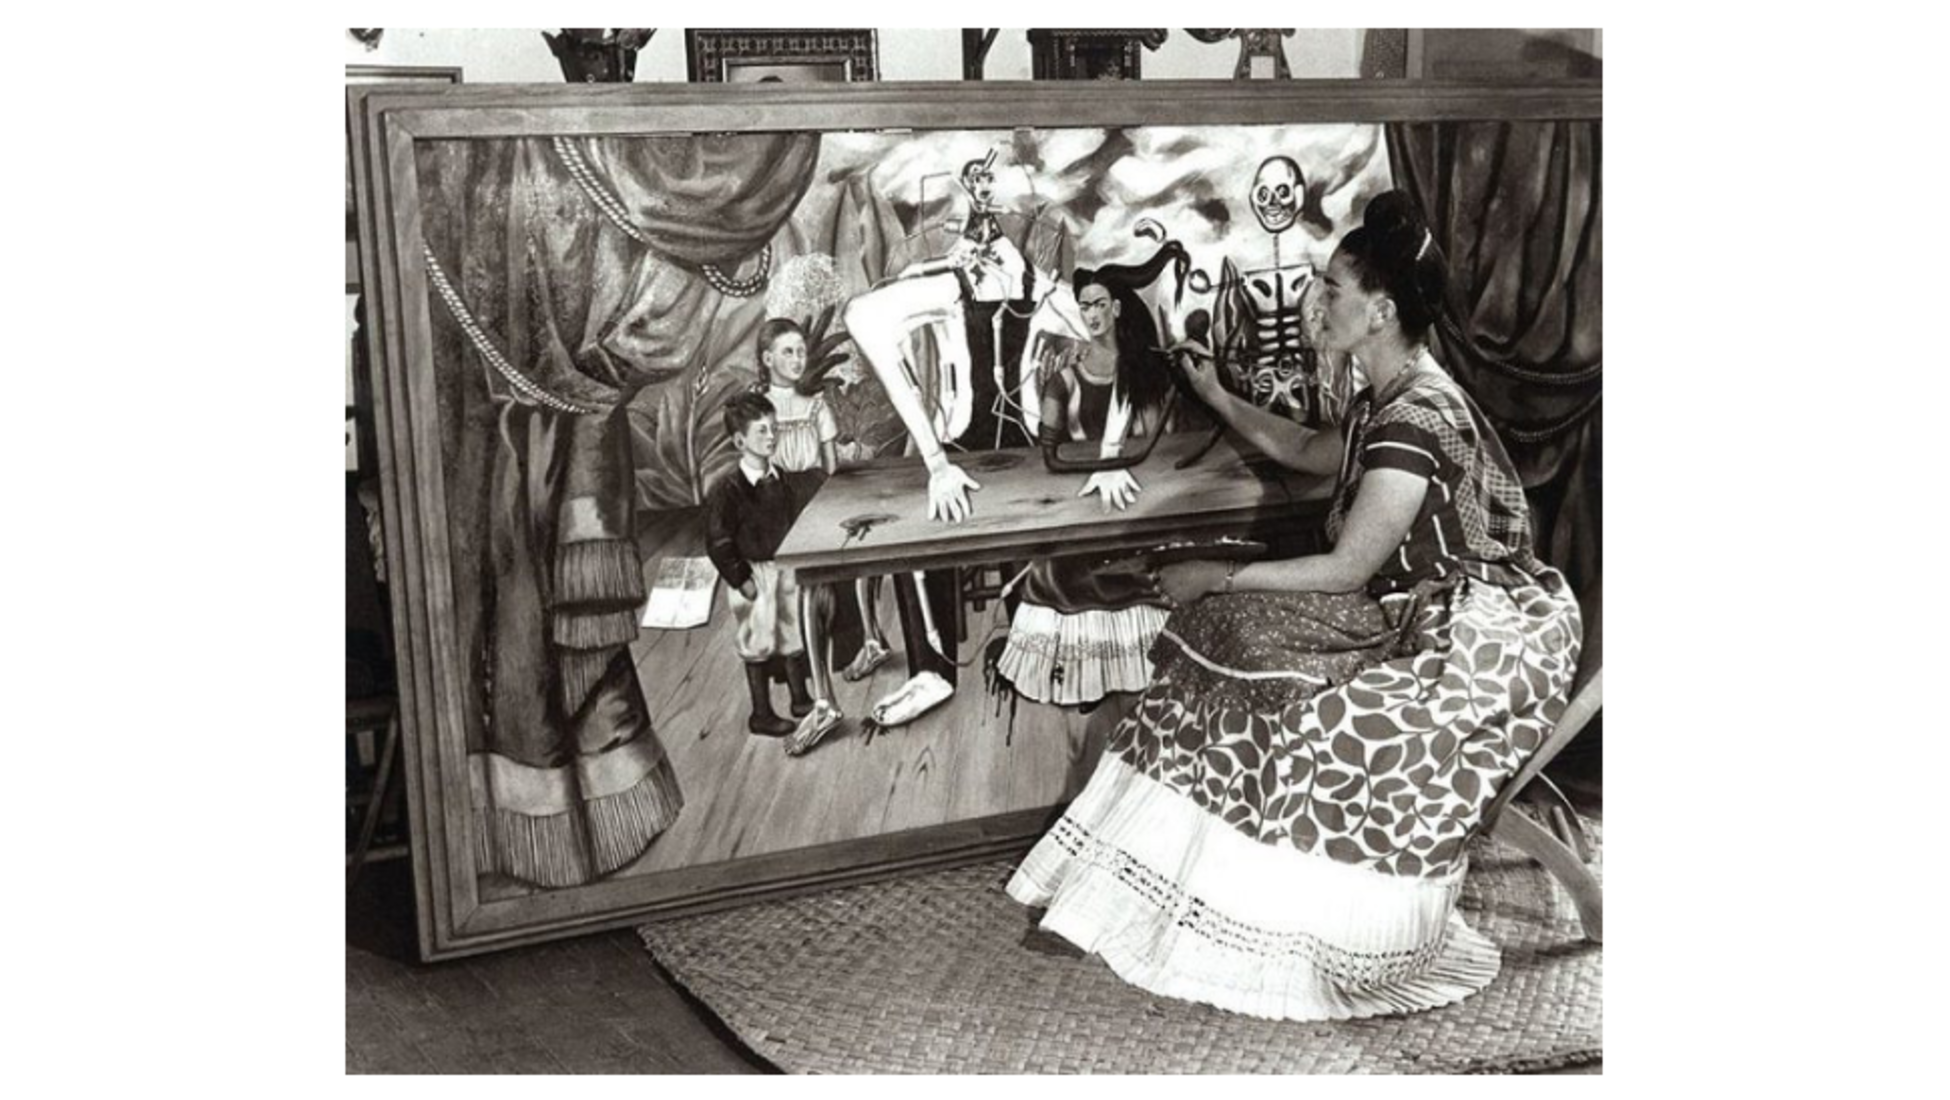 home Dust ignore What Frida Kahlo's paintings tell us about her life - Catawiki